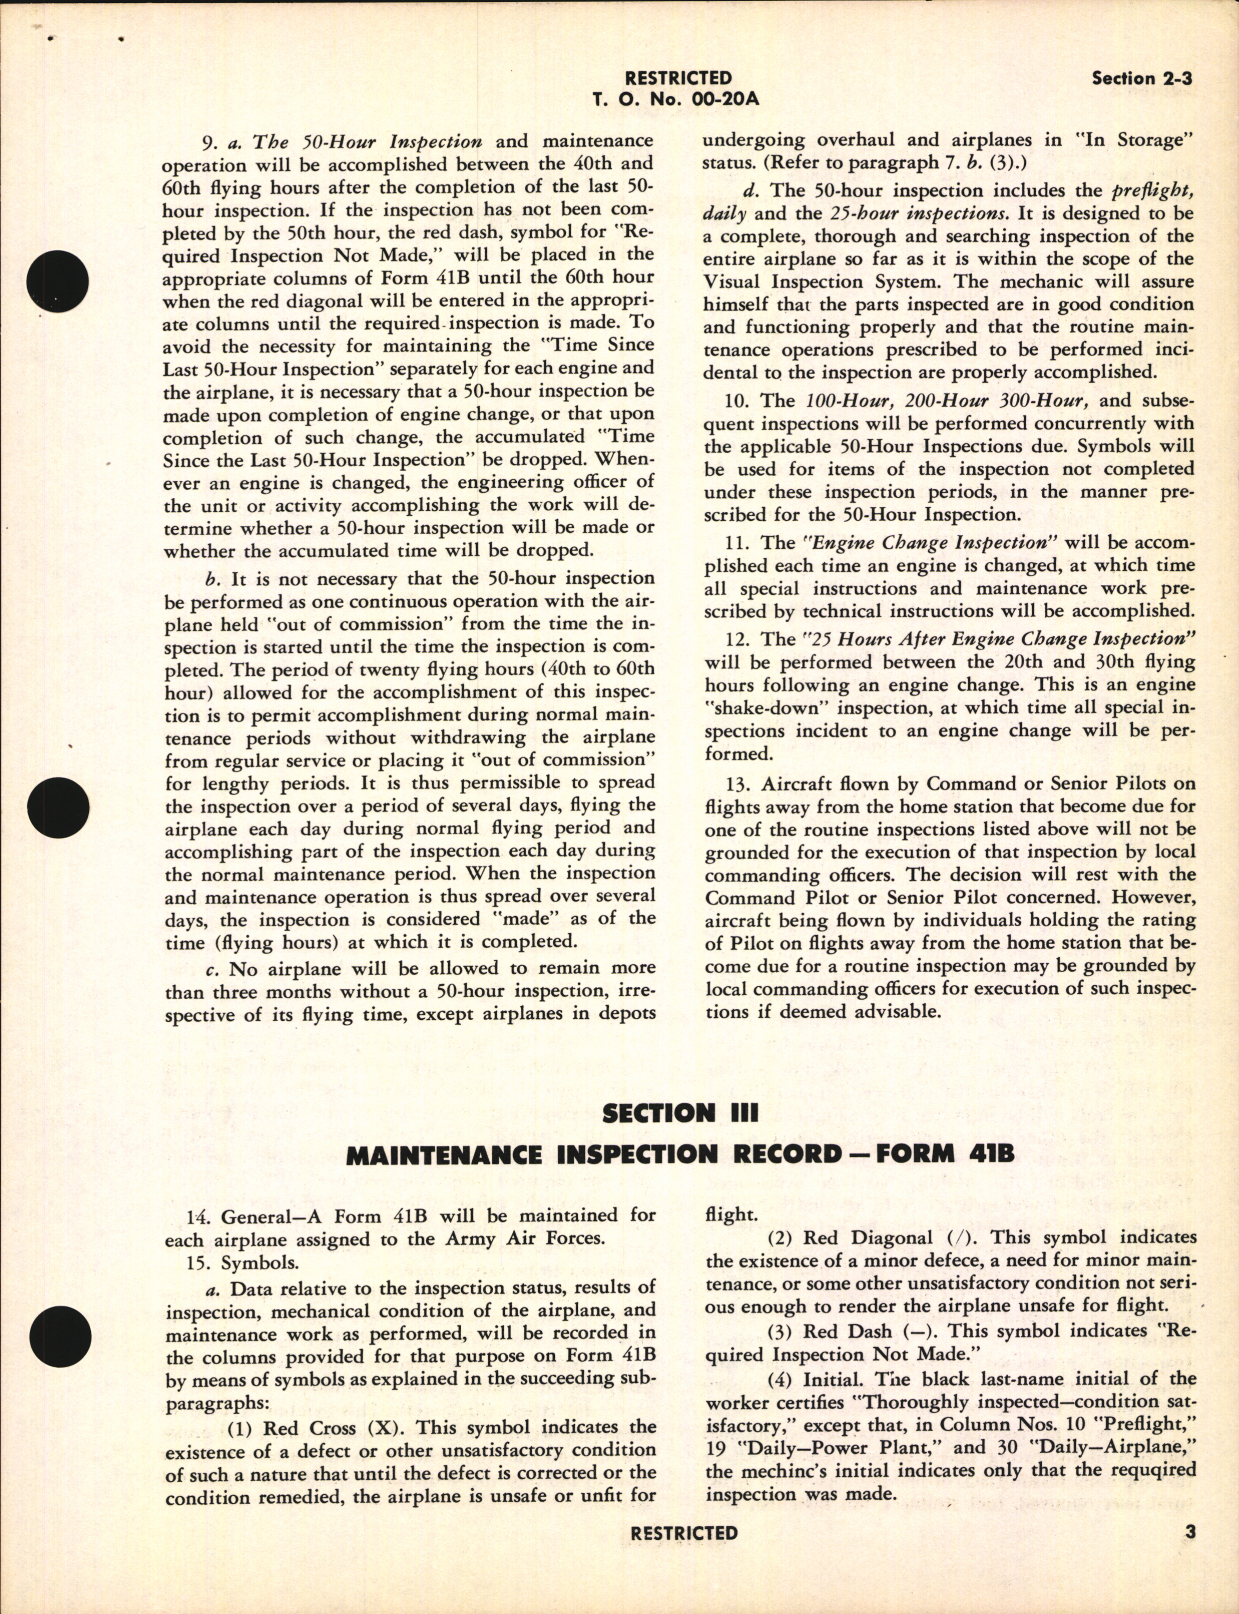 Sample page 5 from AirCorps Library document: The Army Air Forces Visual Inspection System for Airplanes